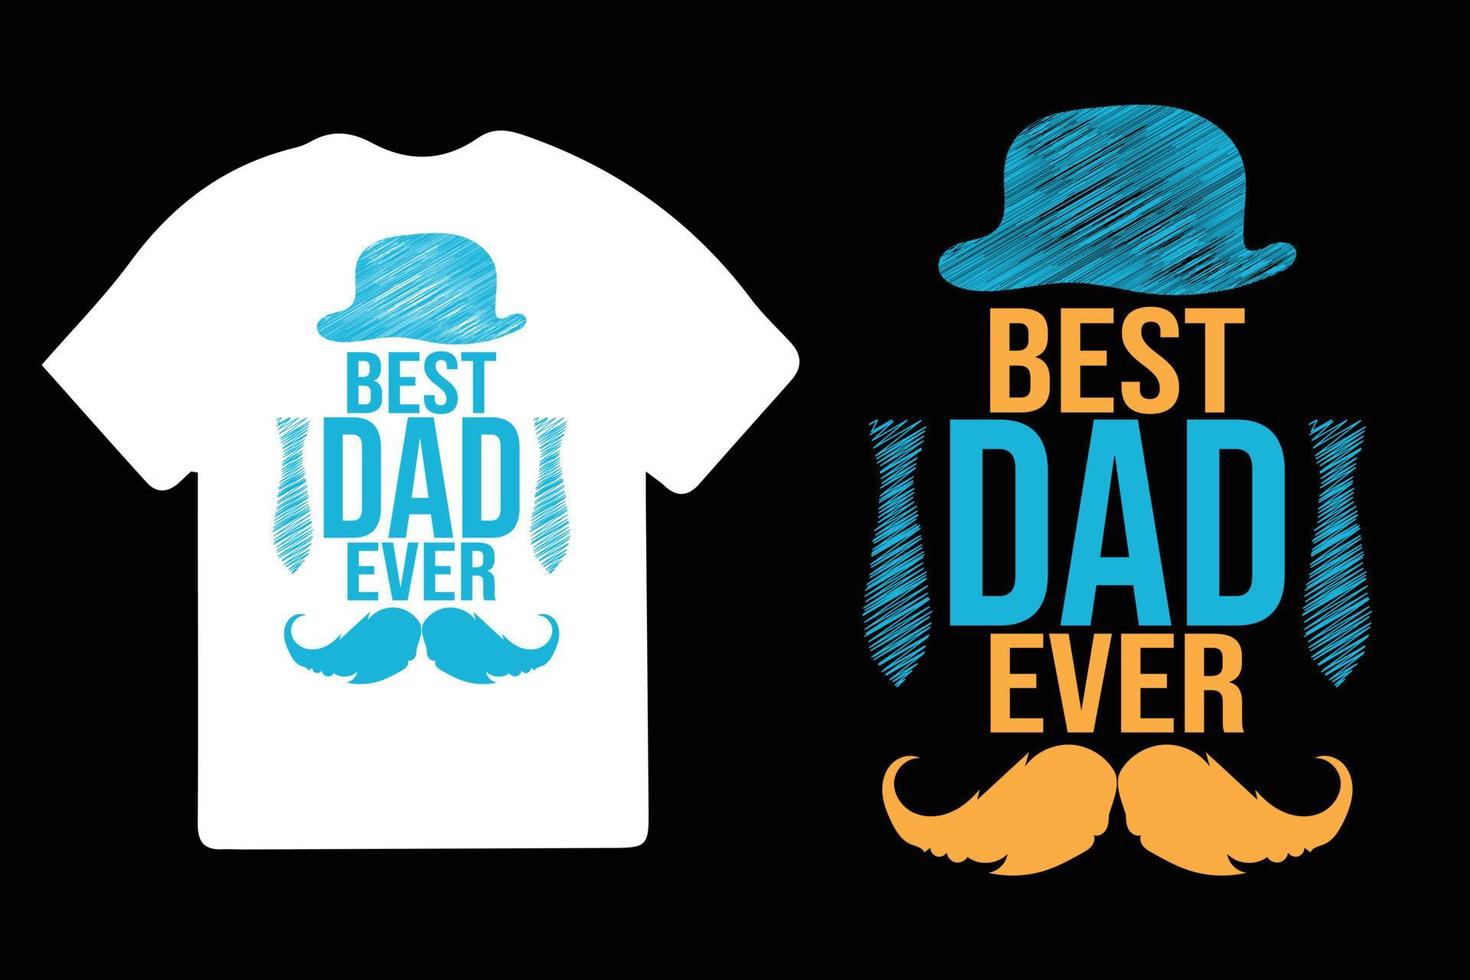 Daddy t-shirts design, Father's day, Happy Father's Day, Father's day T-shirt design. vector